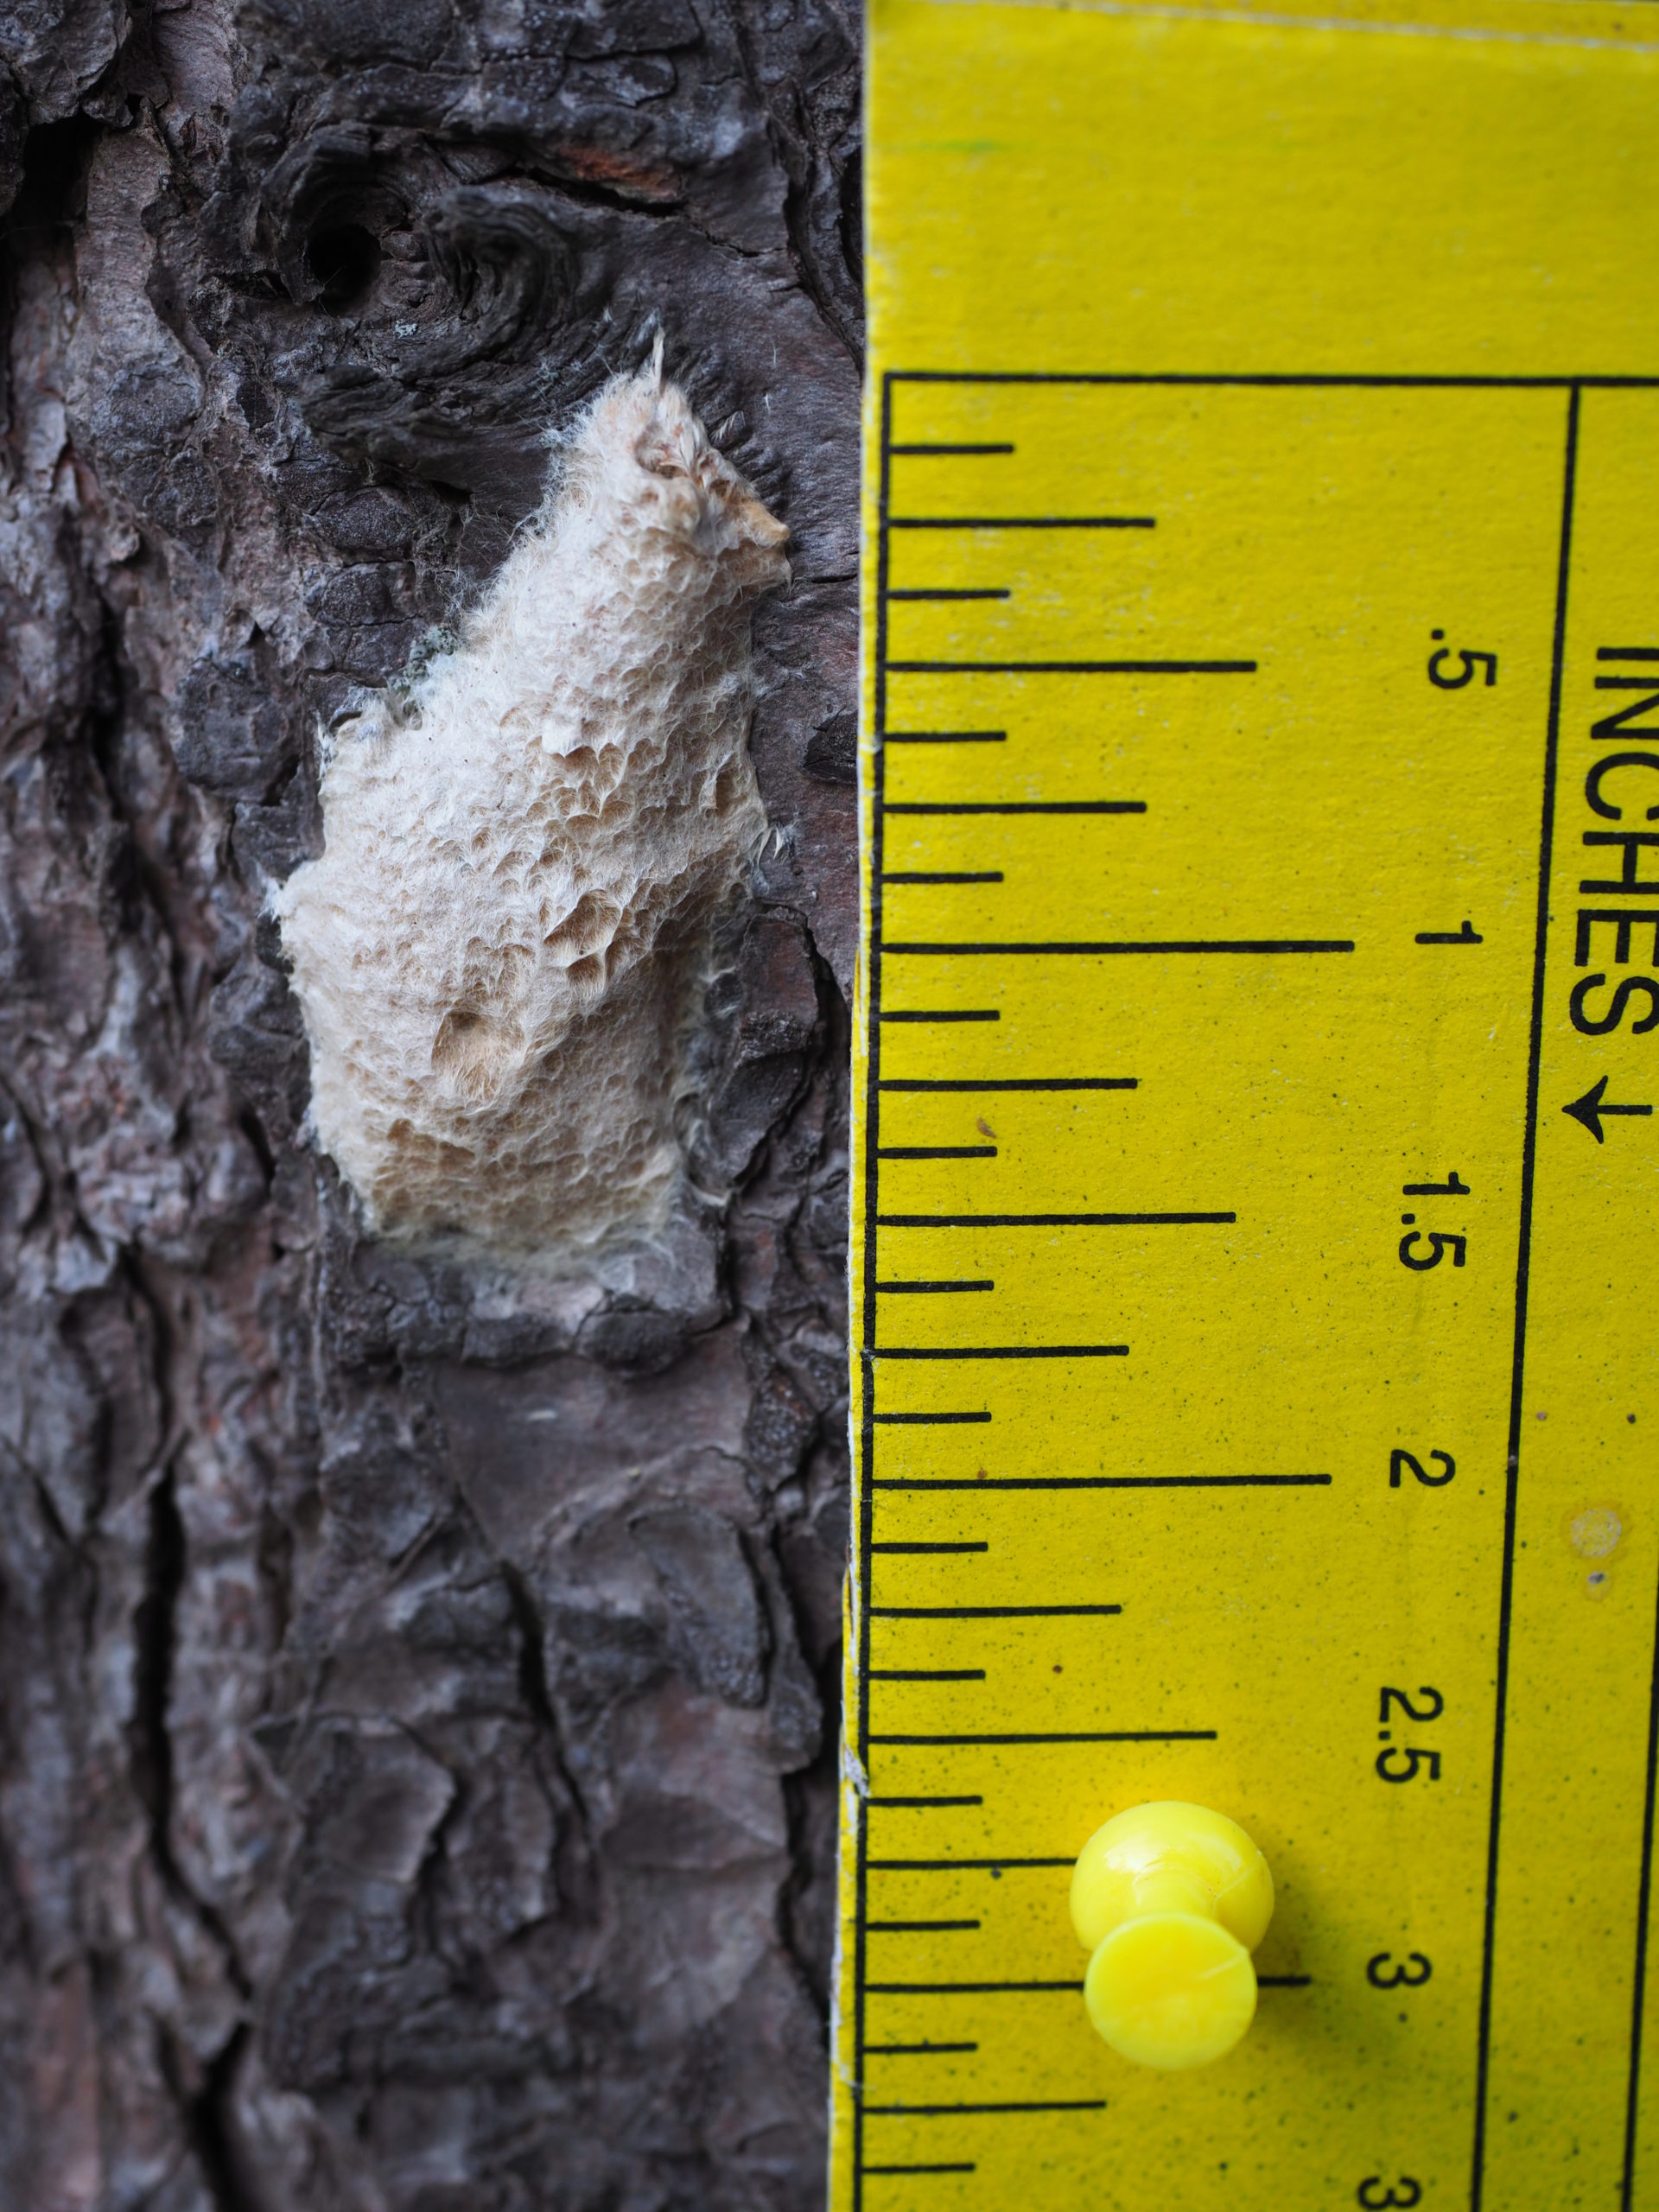 Observed from only a few inches, the gypsy moth egg mass is a buff- or straw-colored feature on tree bark that has the look and consistency of insulation spray foam. Just under 2 inches long and a half inch wide, these egg masses should be scraped off the tree and into a container of soapy water during the winter months.